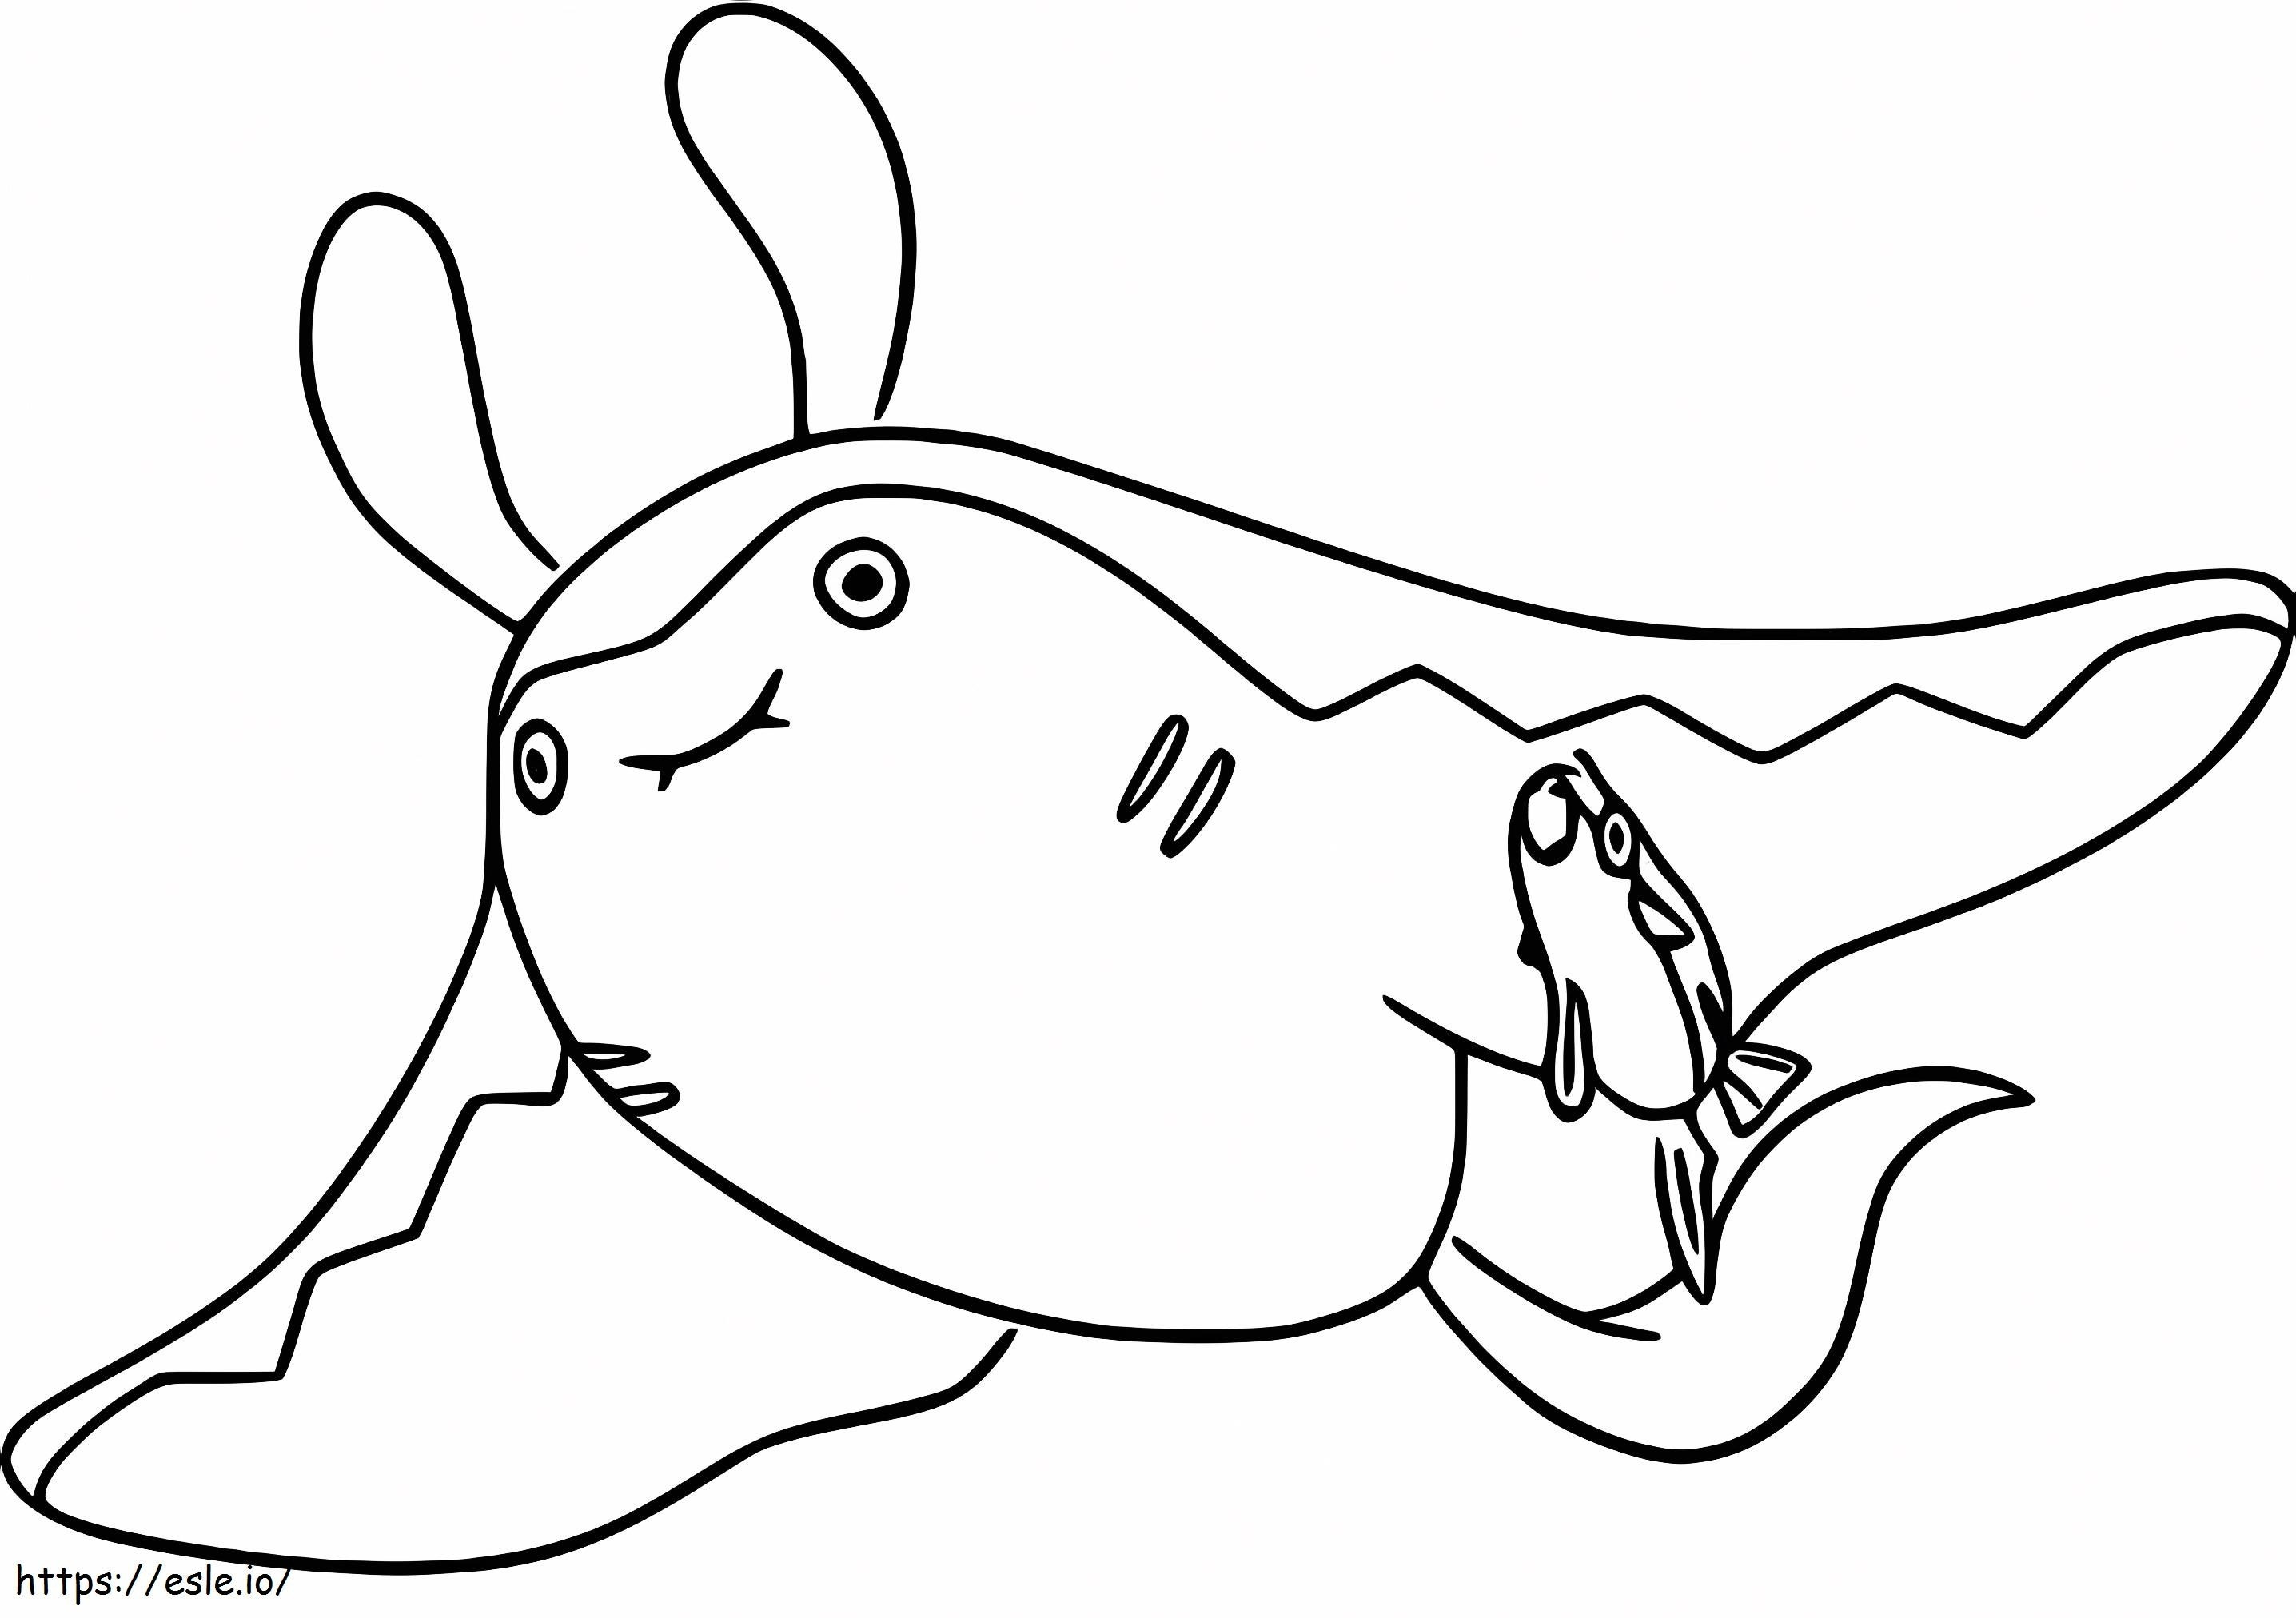 Keep Pokemon coloring page